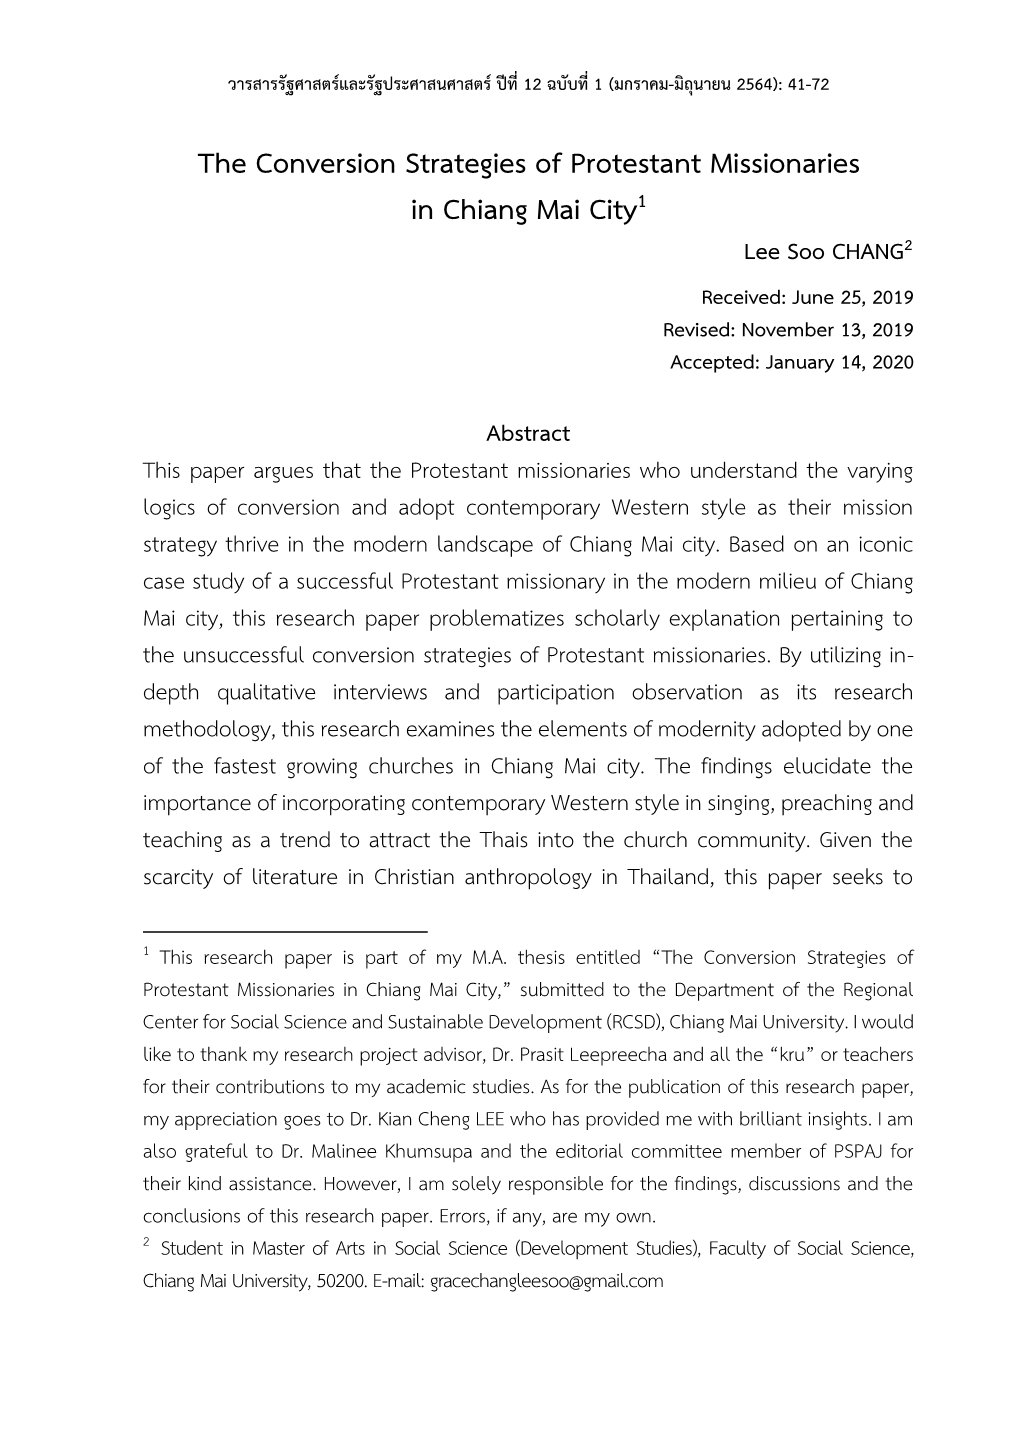 The Conversion Strategies of Protestant Missionaries in Chiang Mai City1 Lee Soo CHANG2 Received: June 25, 2019 Revised: November 13, 2019 Accepted: January 14, 2020